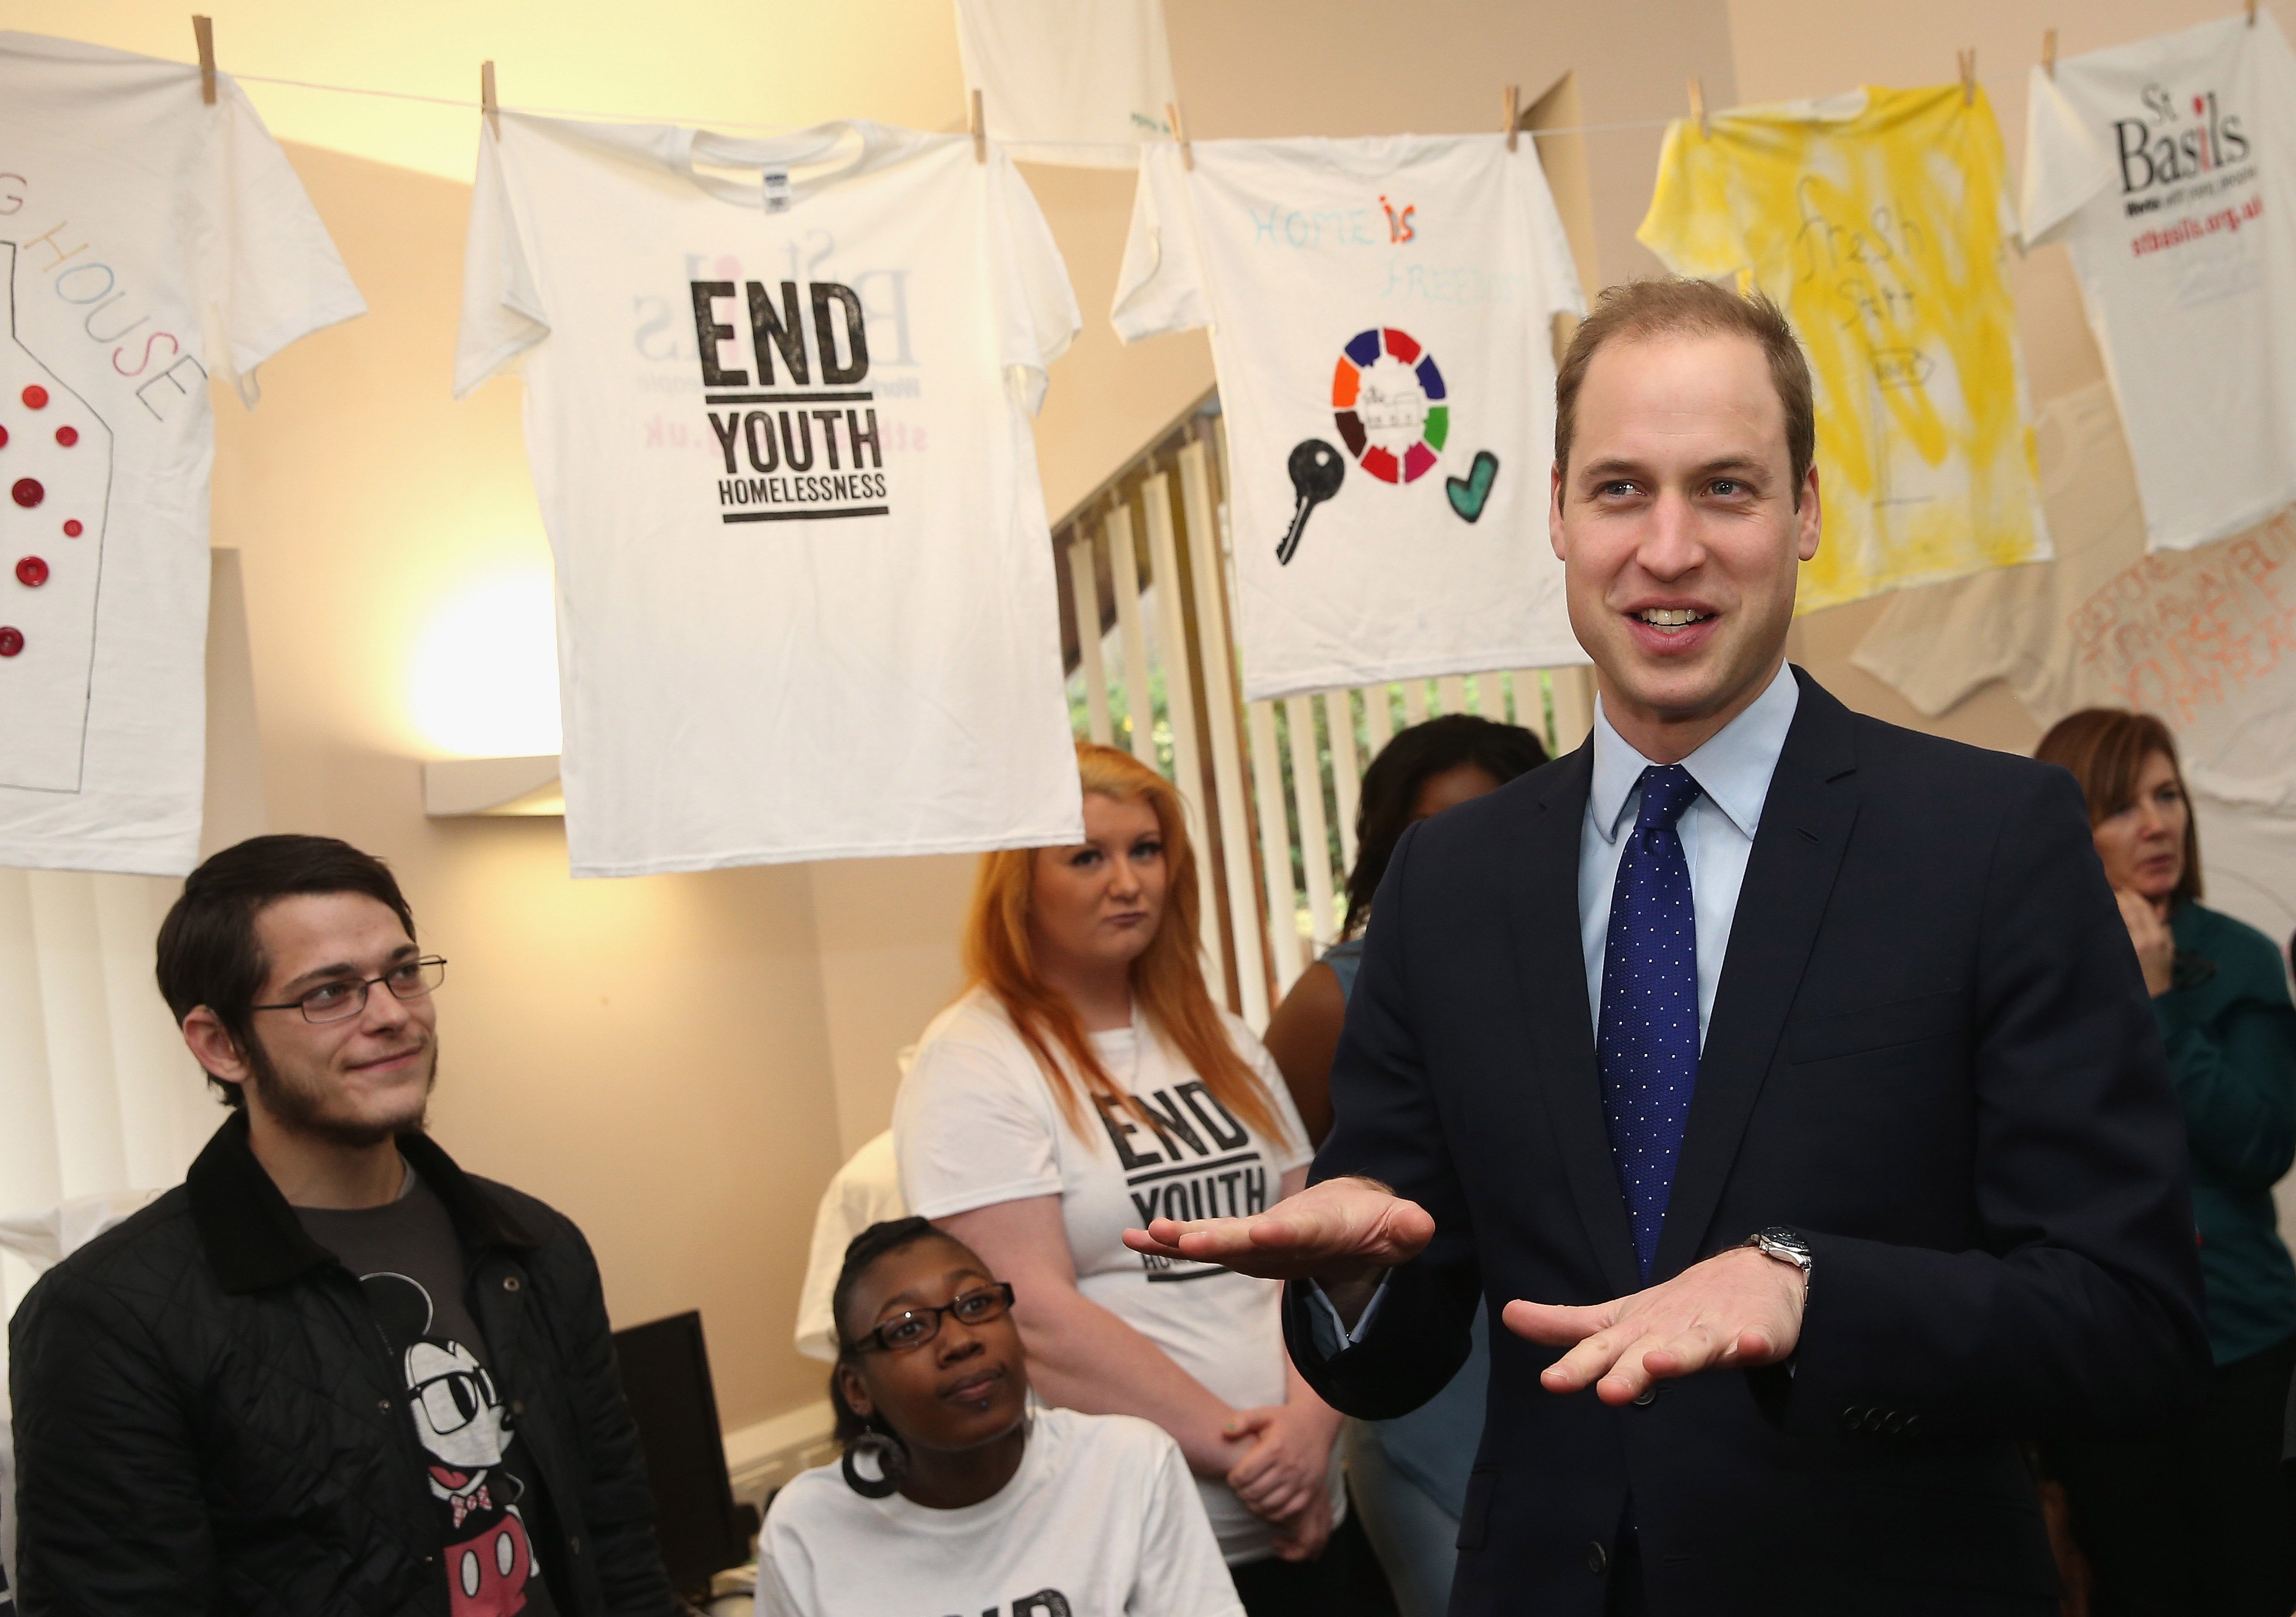 Prince William pictured meeting youths during his visit to St Basil's youth homeless charity project on November 29, 2013 in Birmingham. / Source: Getty Images